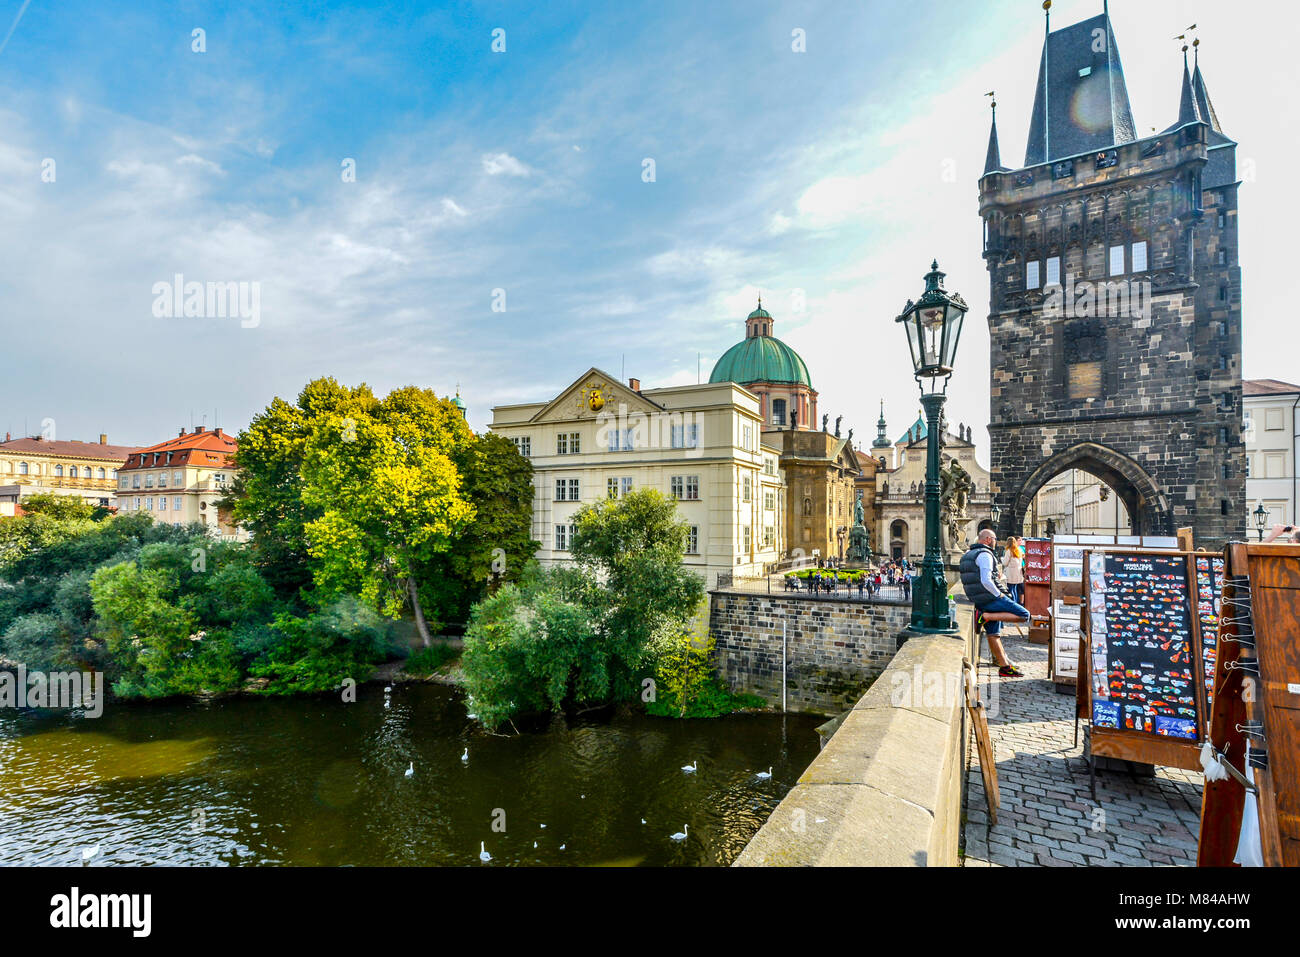 The Old Town bridge tower in Prague, Czechia, over the River Vltava with vendors selling souvenirs. Stock Photo